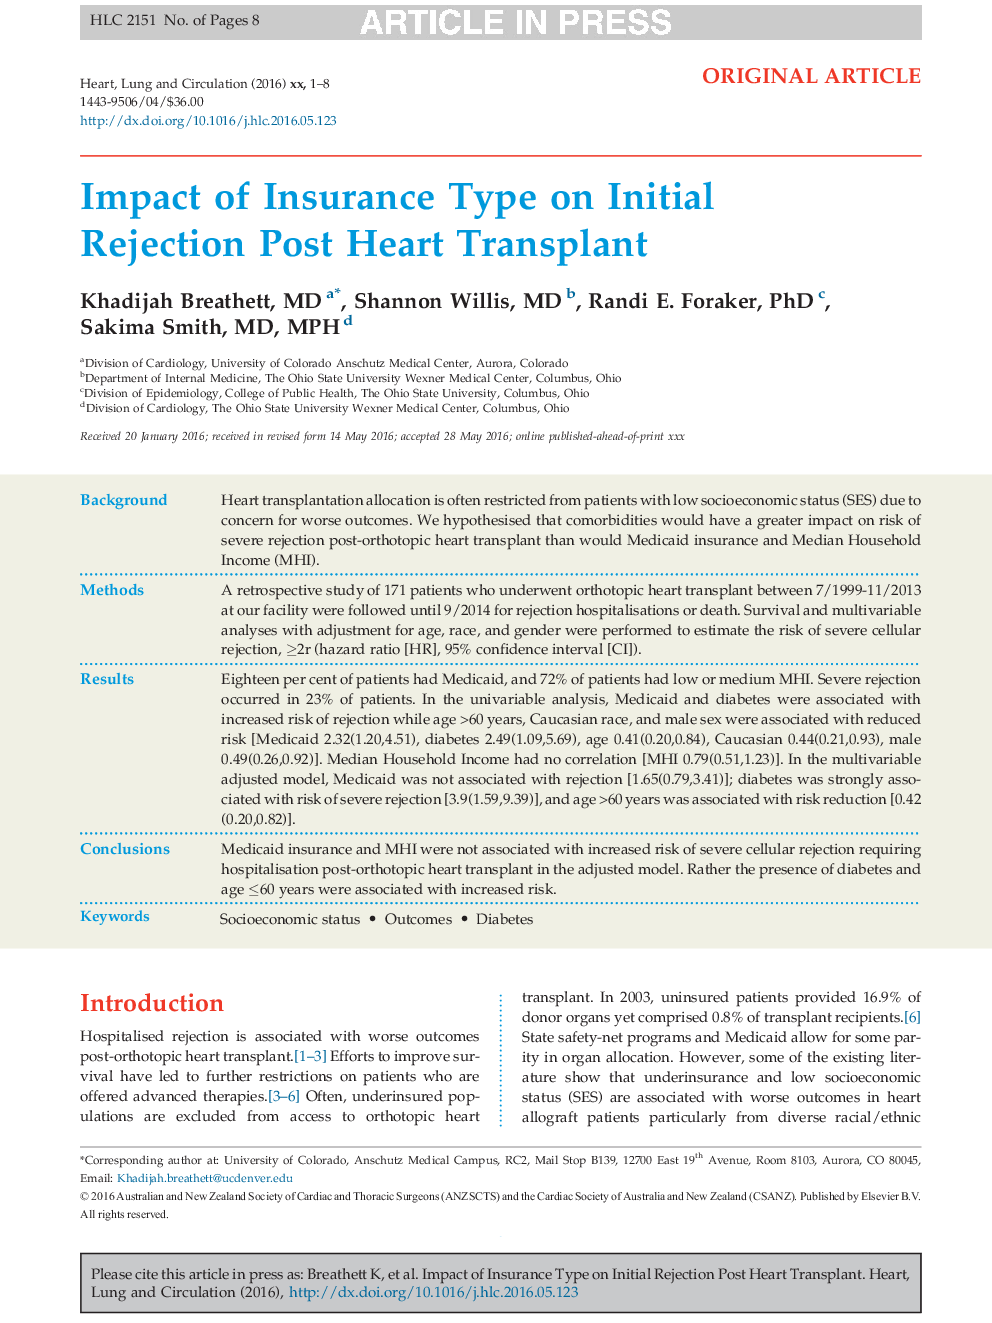 Impact of Insurance Type on Initial Rejection Post Heart Transplant